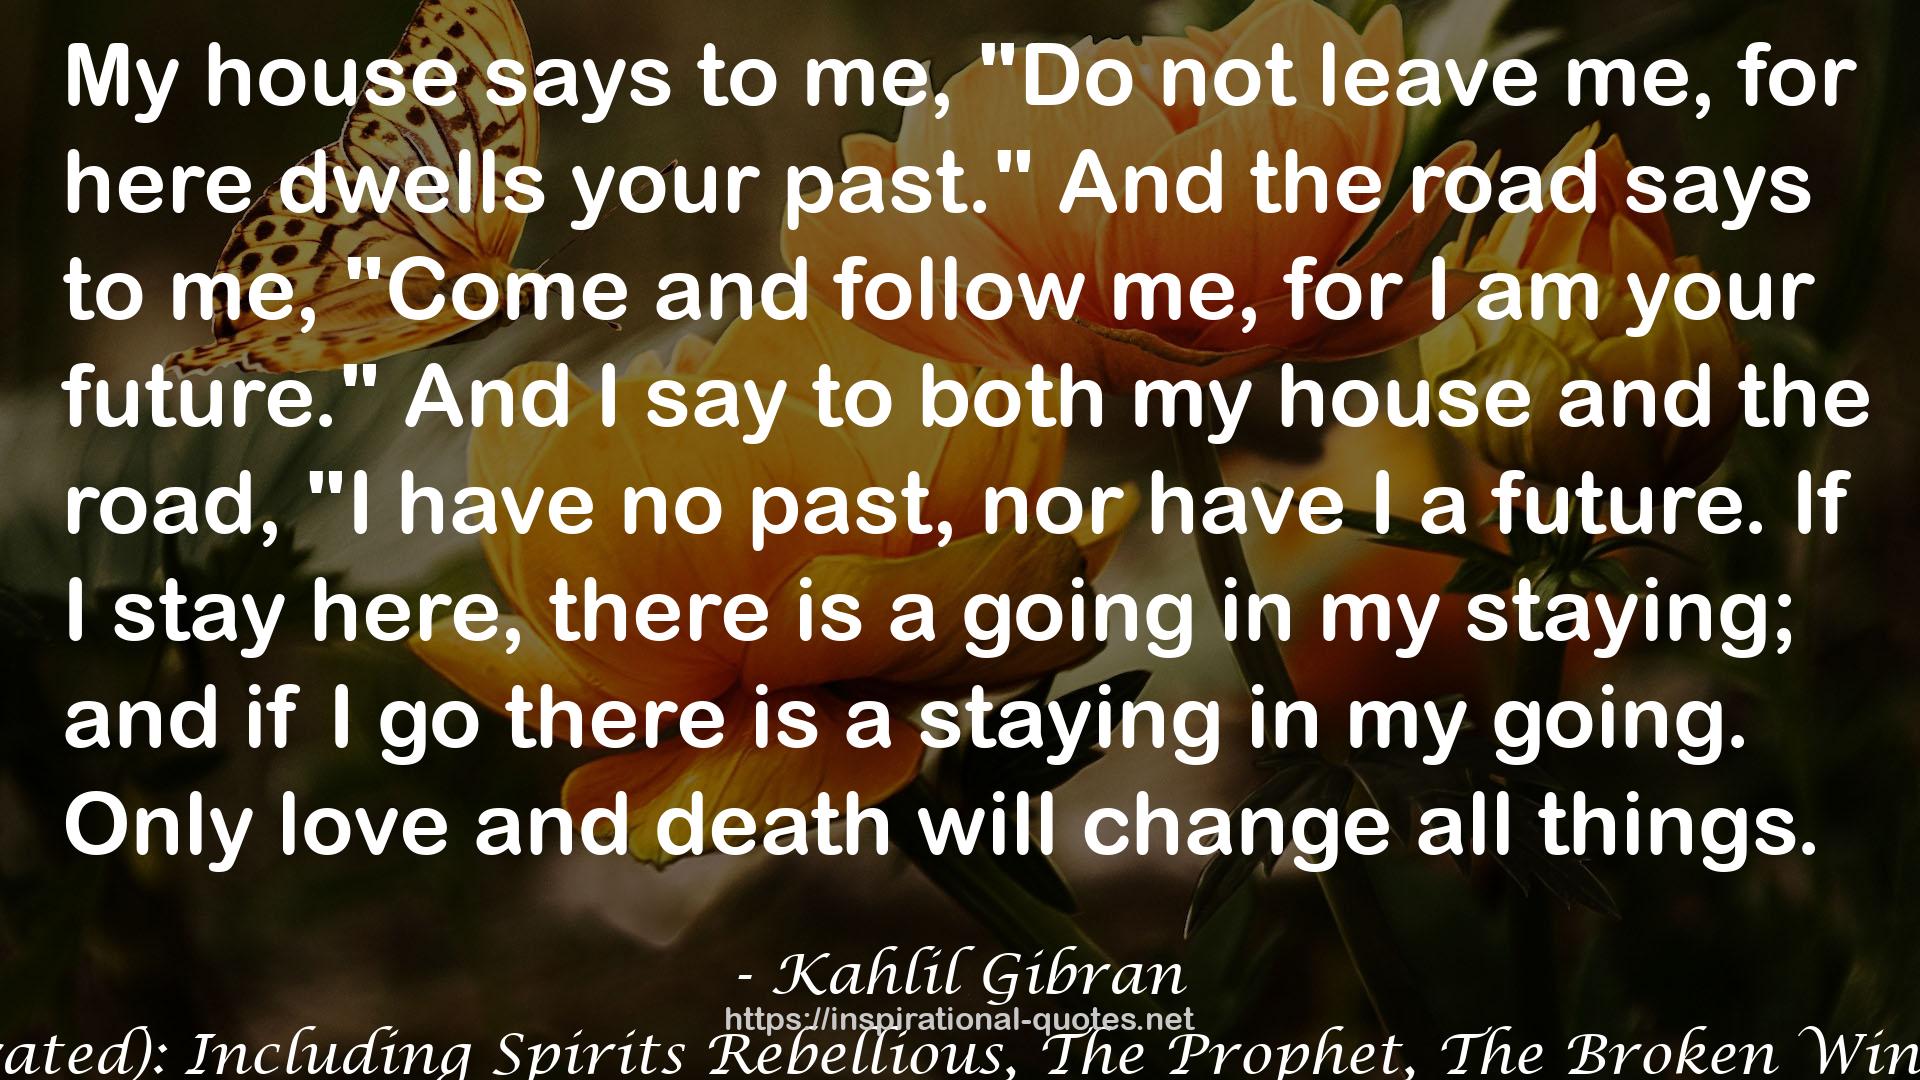 Kahlil Gibran Ultimate Collection - 21 Books in One Volume (Illustrated): Including Spirits Rebellious, The Prophet, The Broken Wings, The Madman, The ... Nation, I Believe In You and Many Others QUOTES